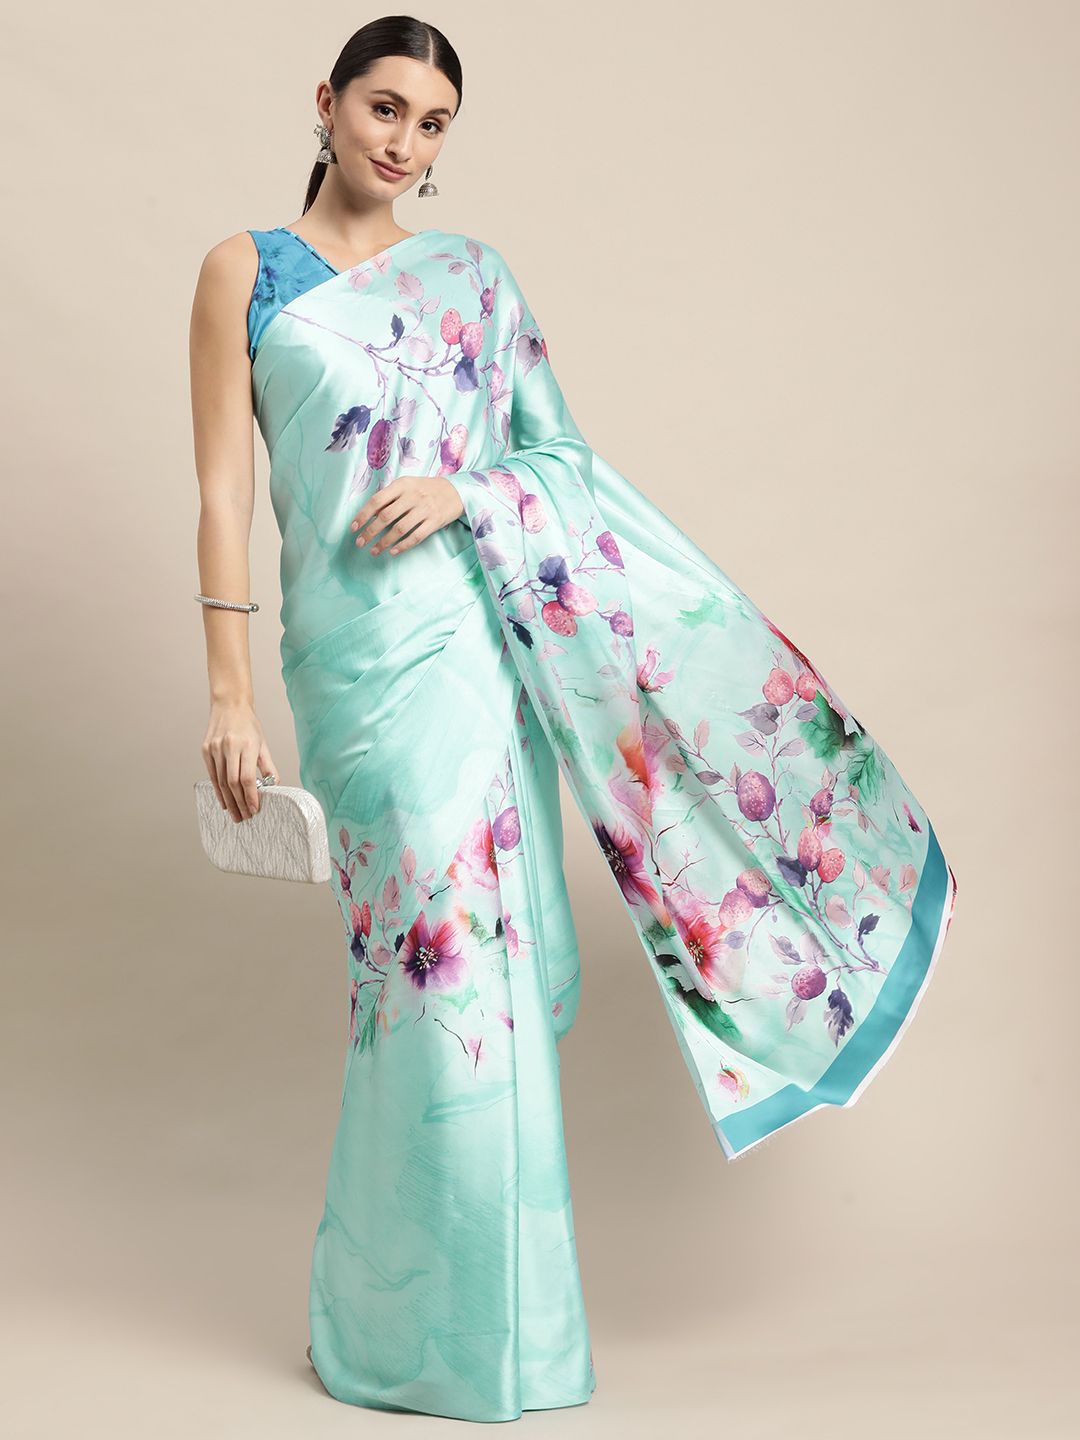 VAIRAGEE Turquoise Blue & Pink Floral Printed Saree Price in India